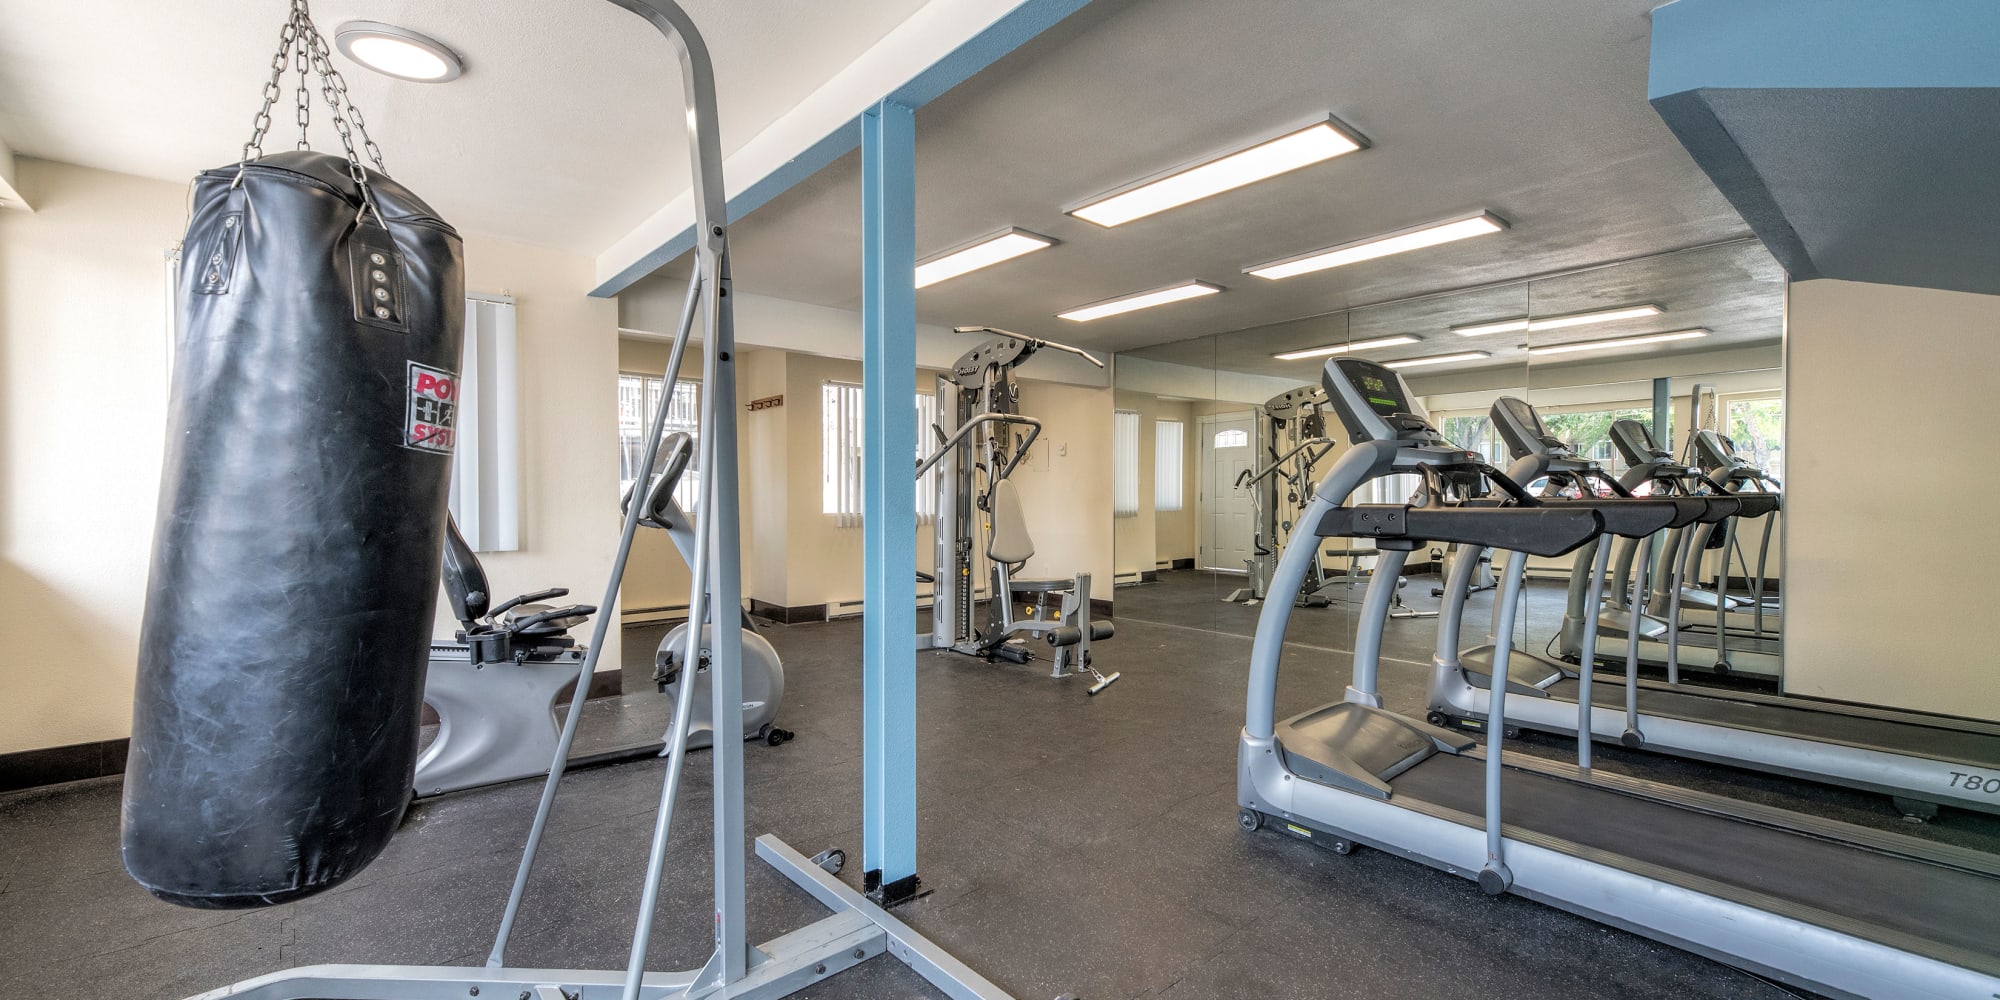 Fitness center at Keyway Apartments in Sparks, Nevada